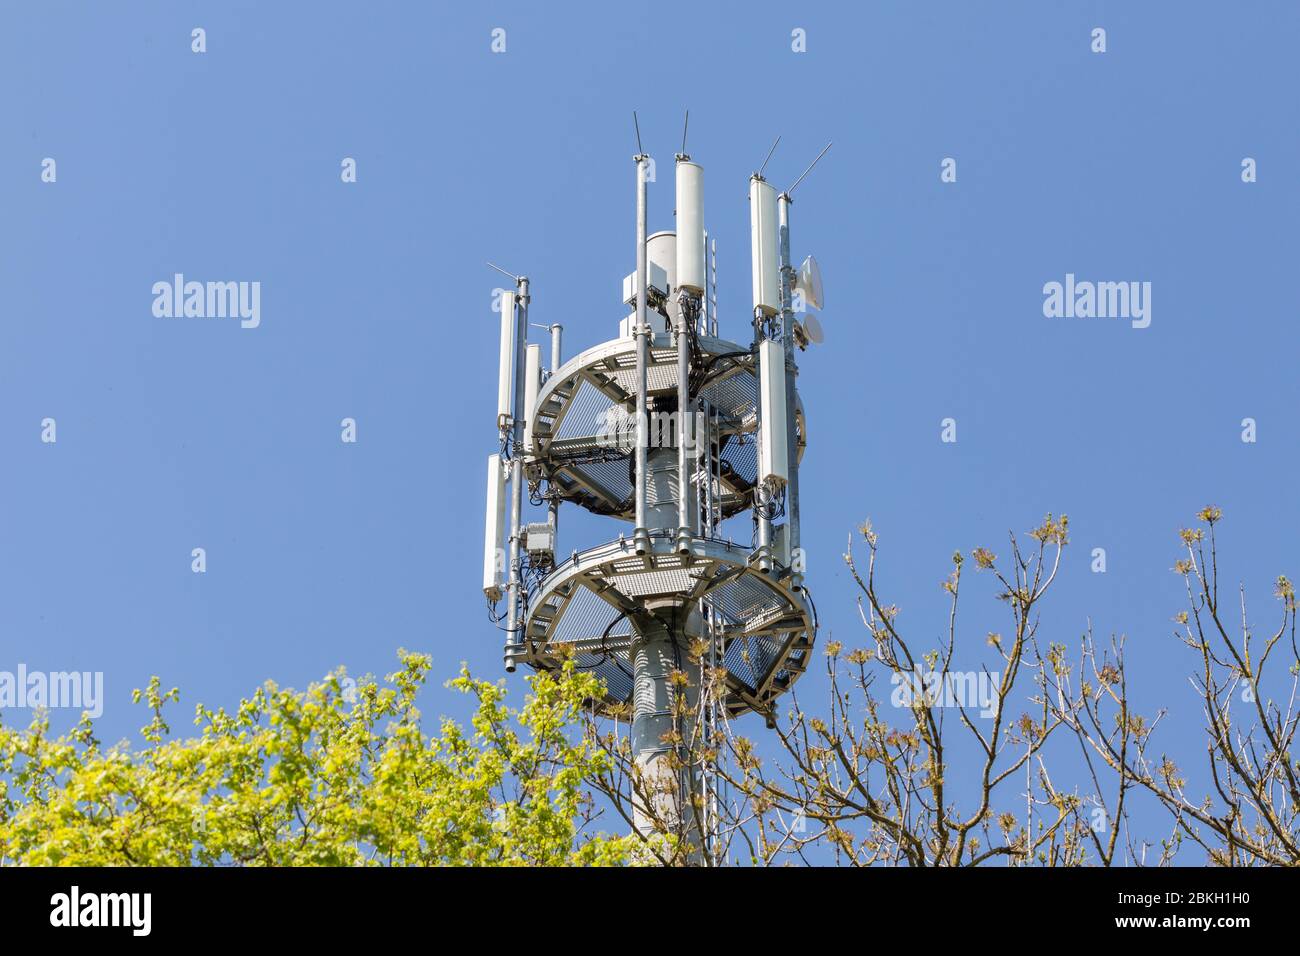 View on the top part of a mobile phone / telecommunications mast. Used for transmitting signals and data. E. g. for 5G networks. Blue sky background. Stock Photo